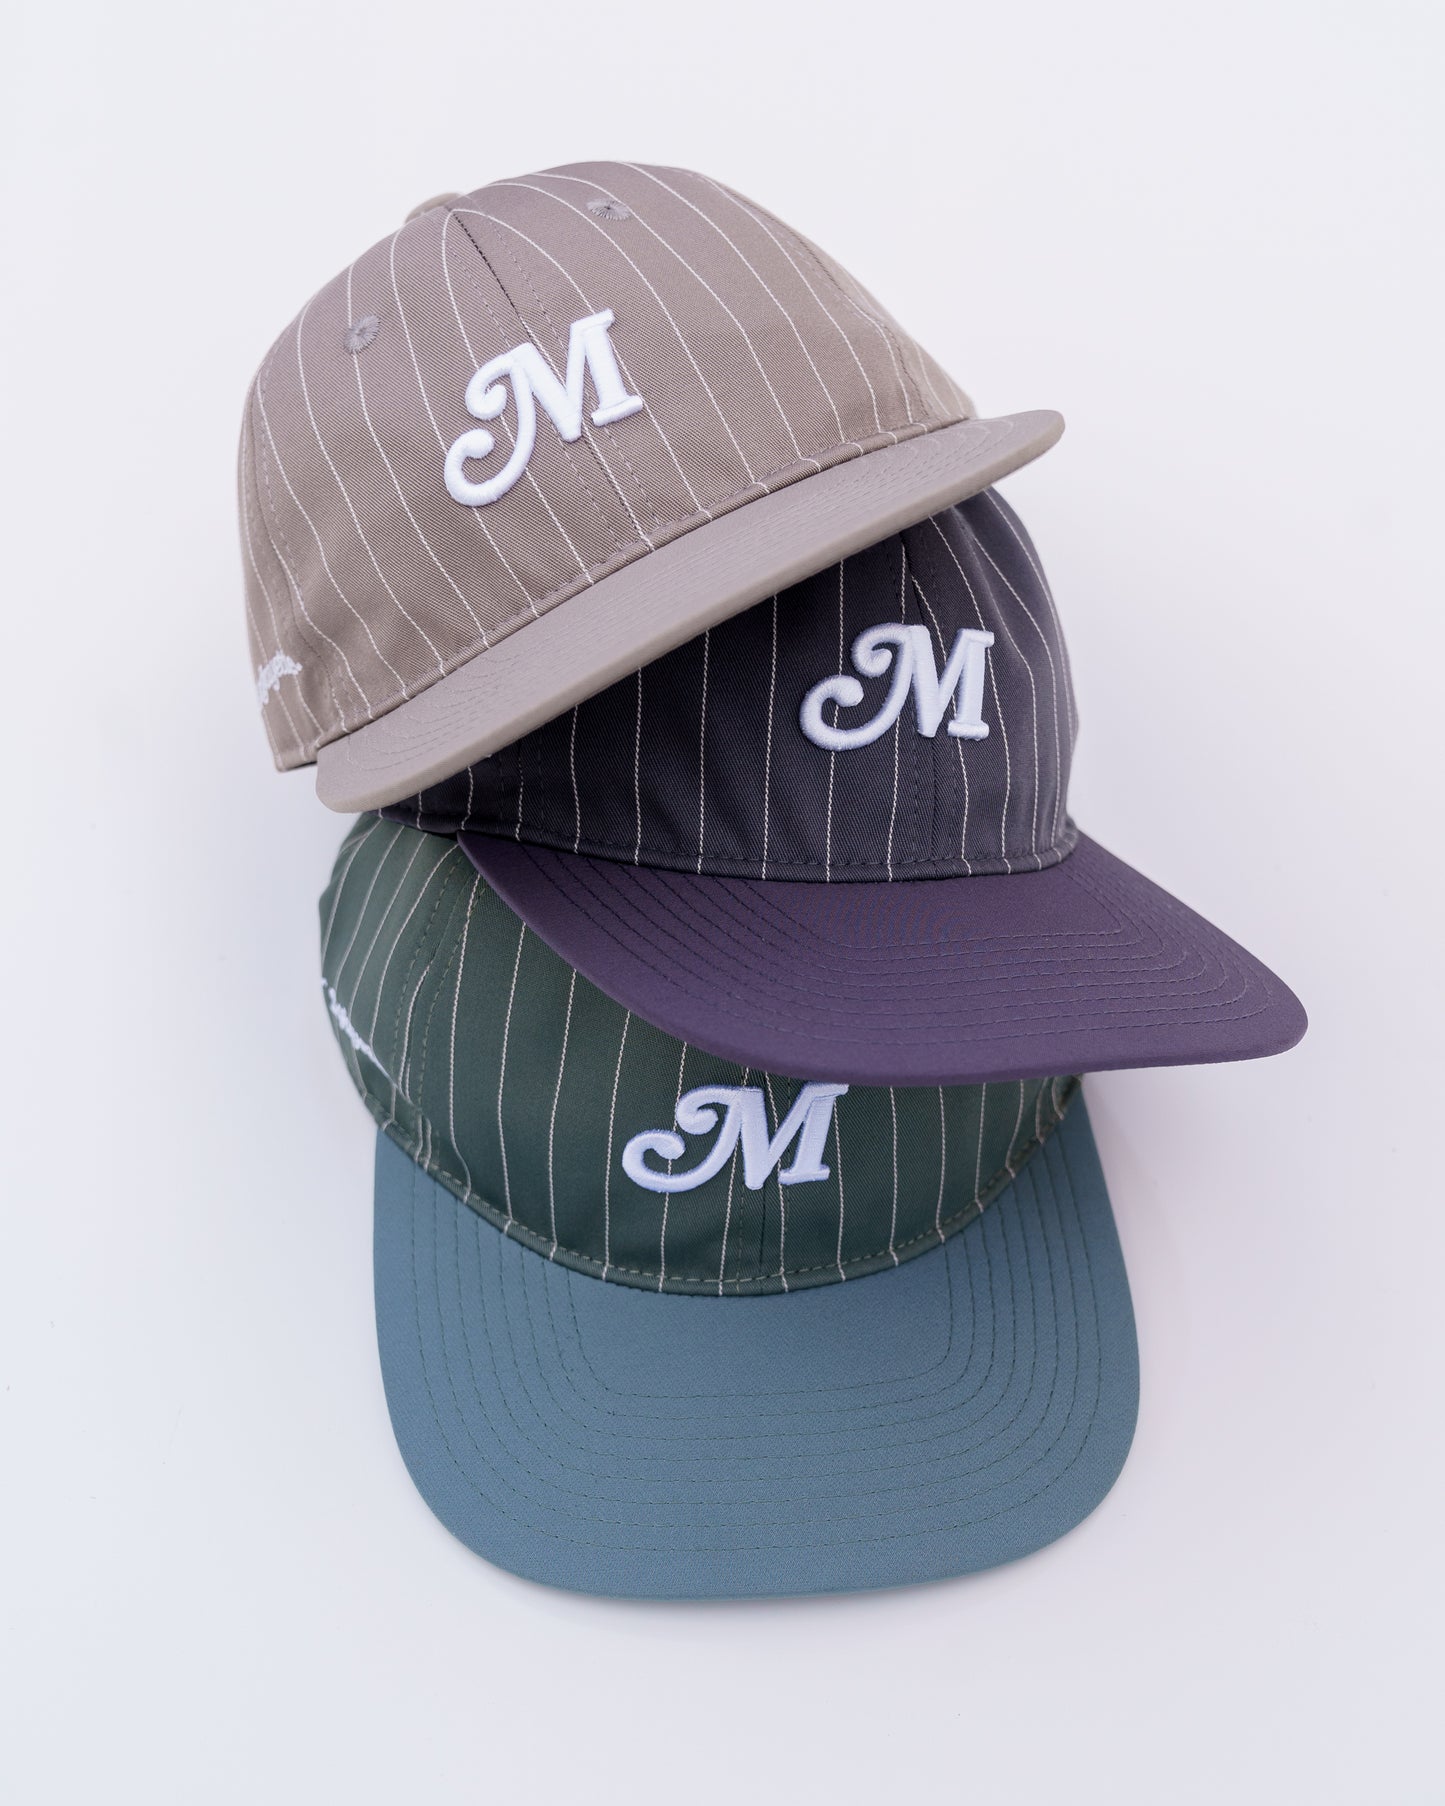 The Pinstripe Hat (Pacific Blue)